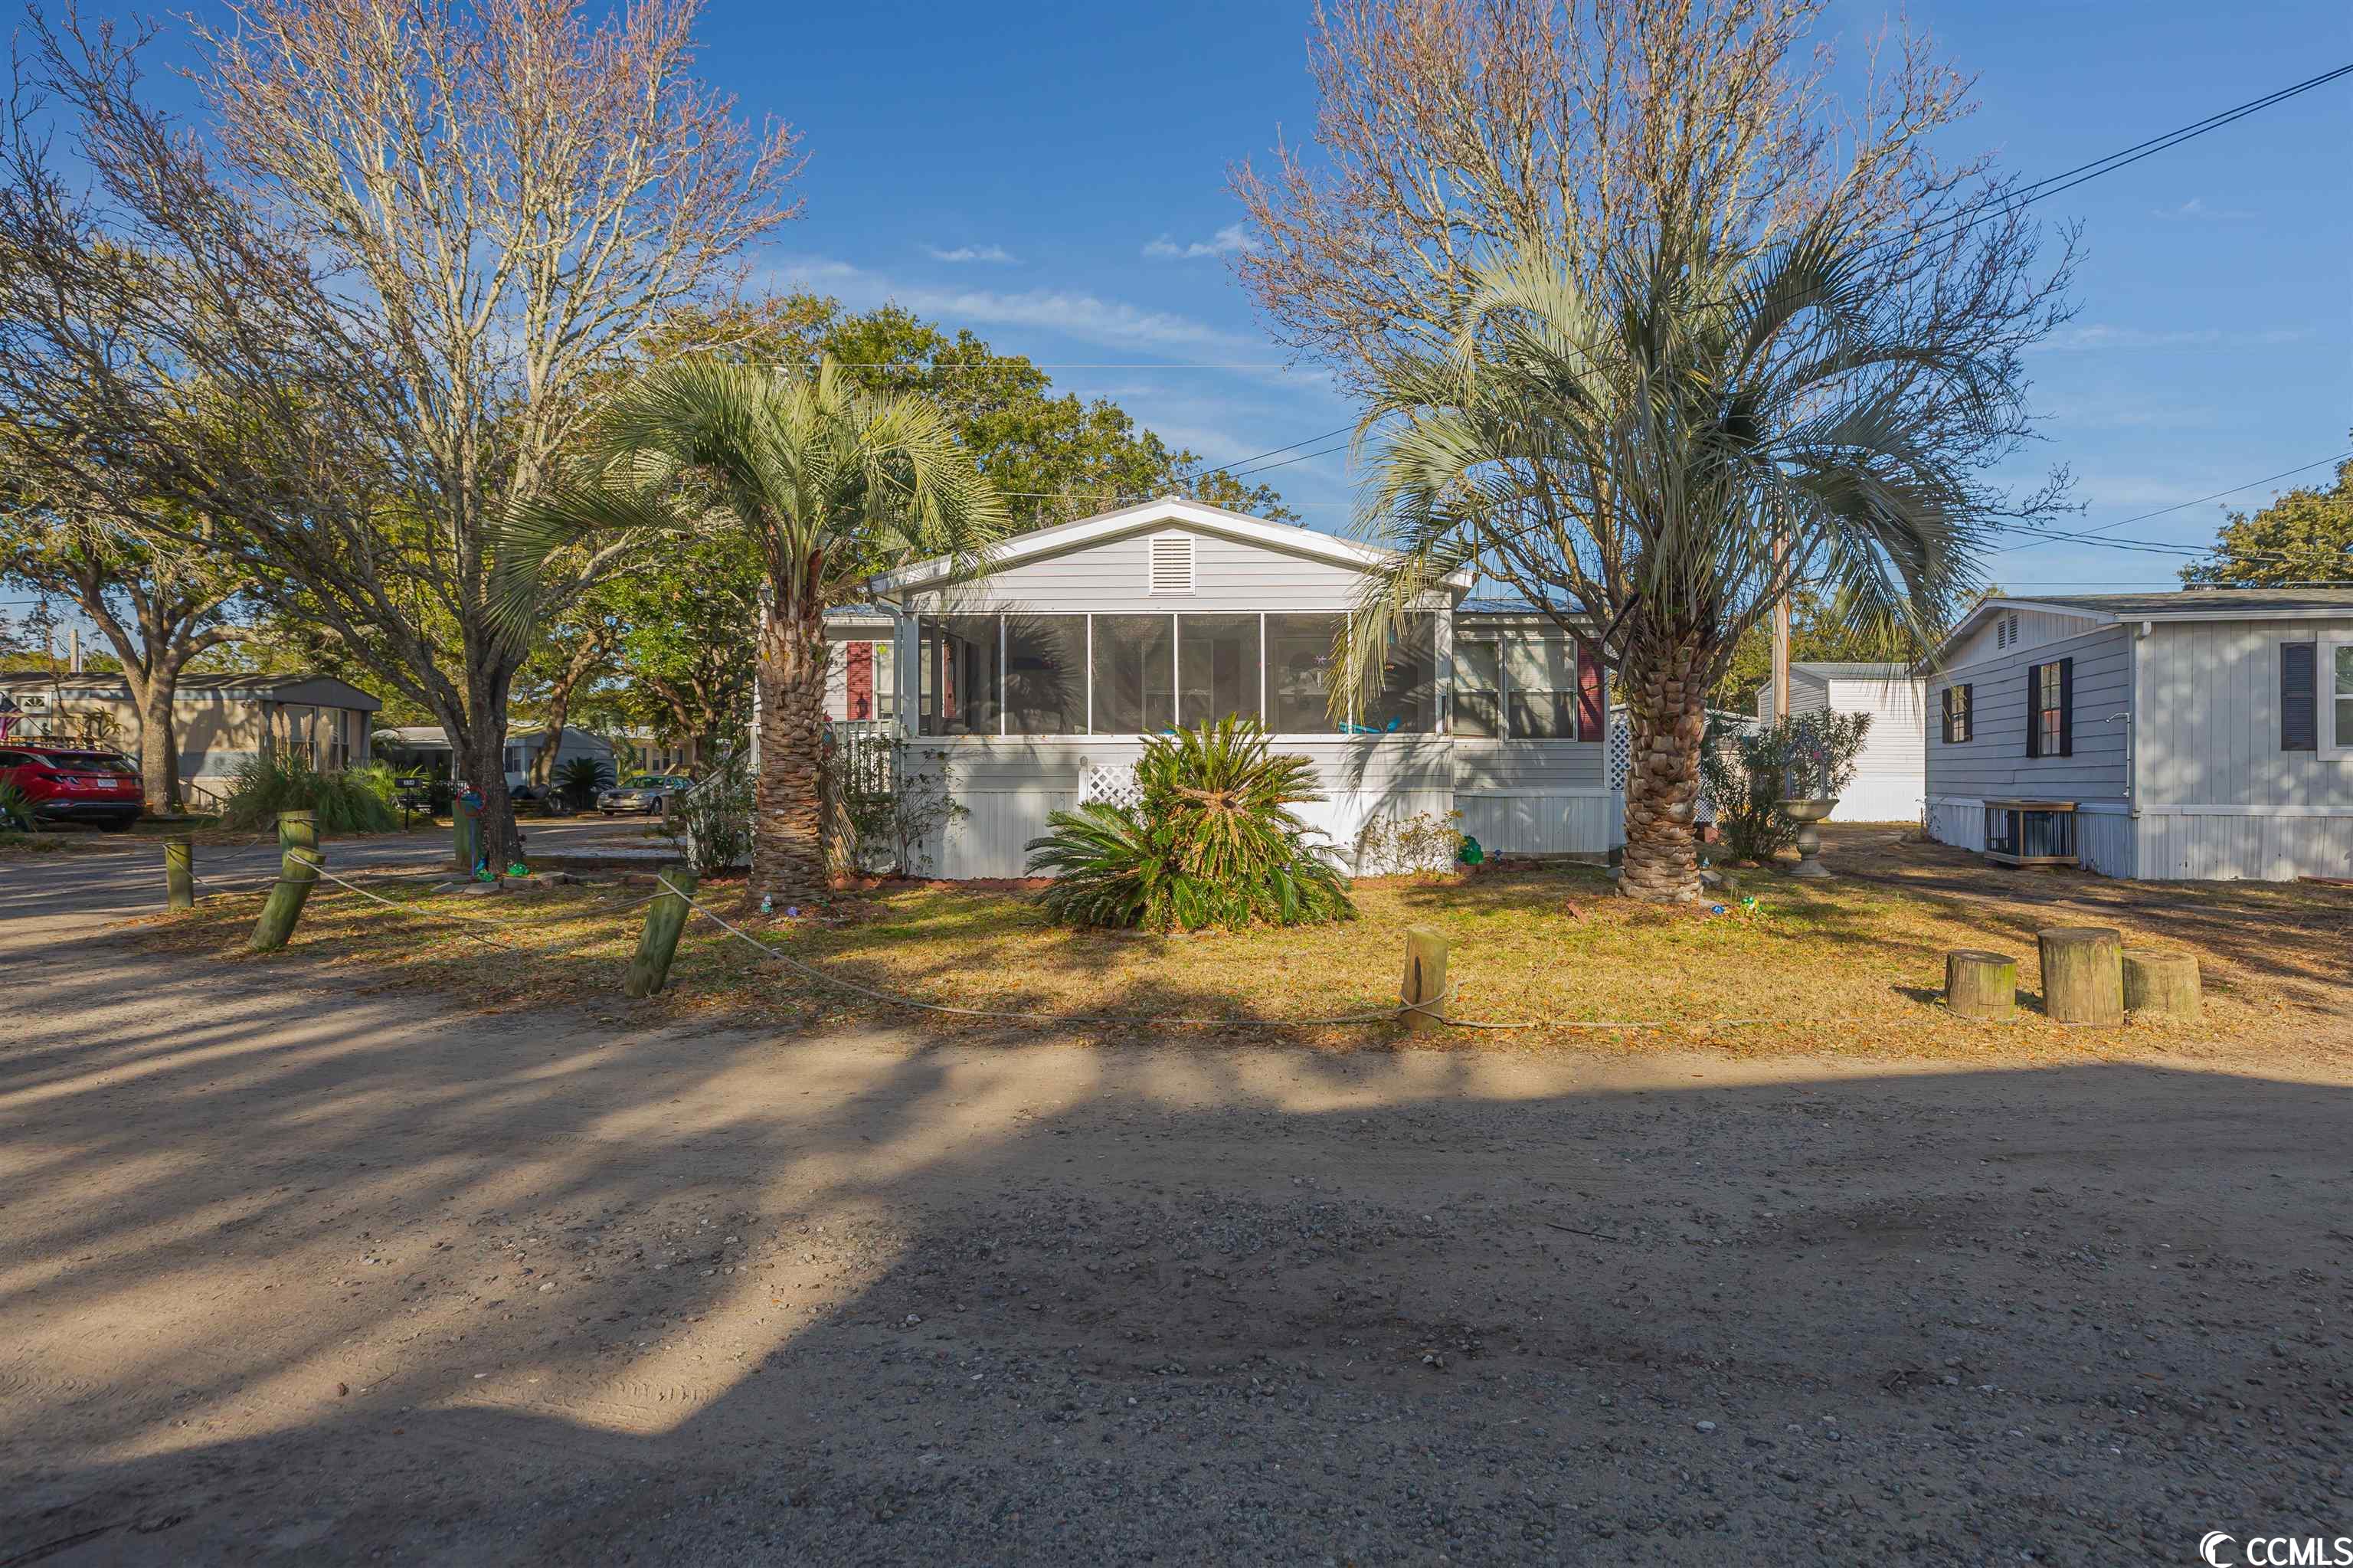 welcome home to this spacious beach house. the home had a new metal roof installed in 2022. hvac under 5 years old. washer and dryer convey. the large screened in front porch has a relaxing vibe and has a view of the marsh! golf cart will convey to enjoy a short ride to the beach. battery is under 2 years old.